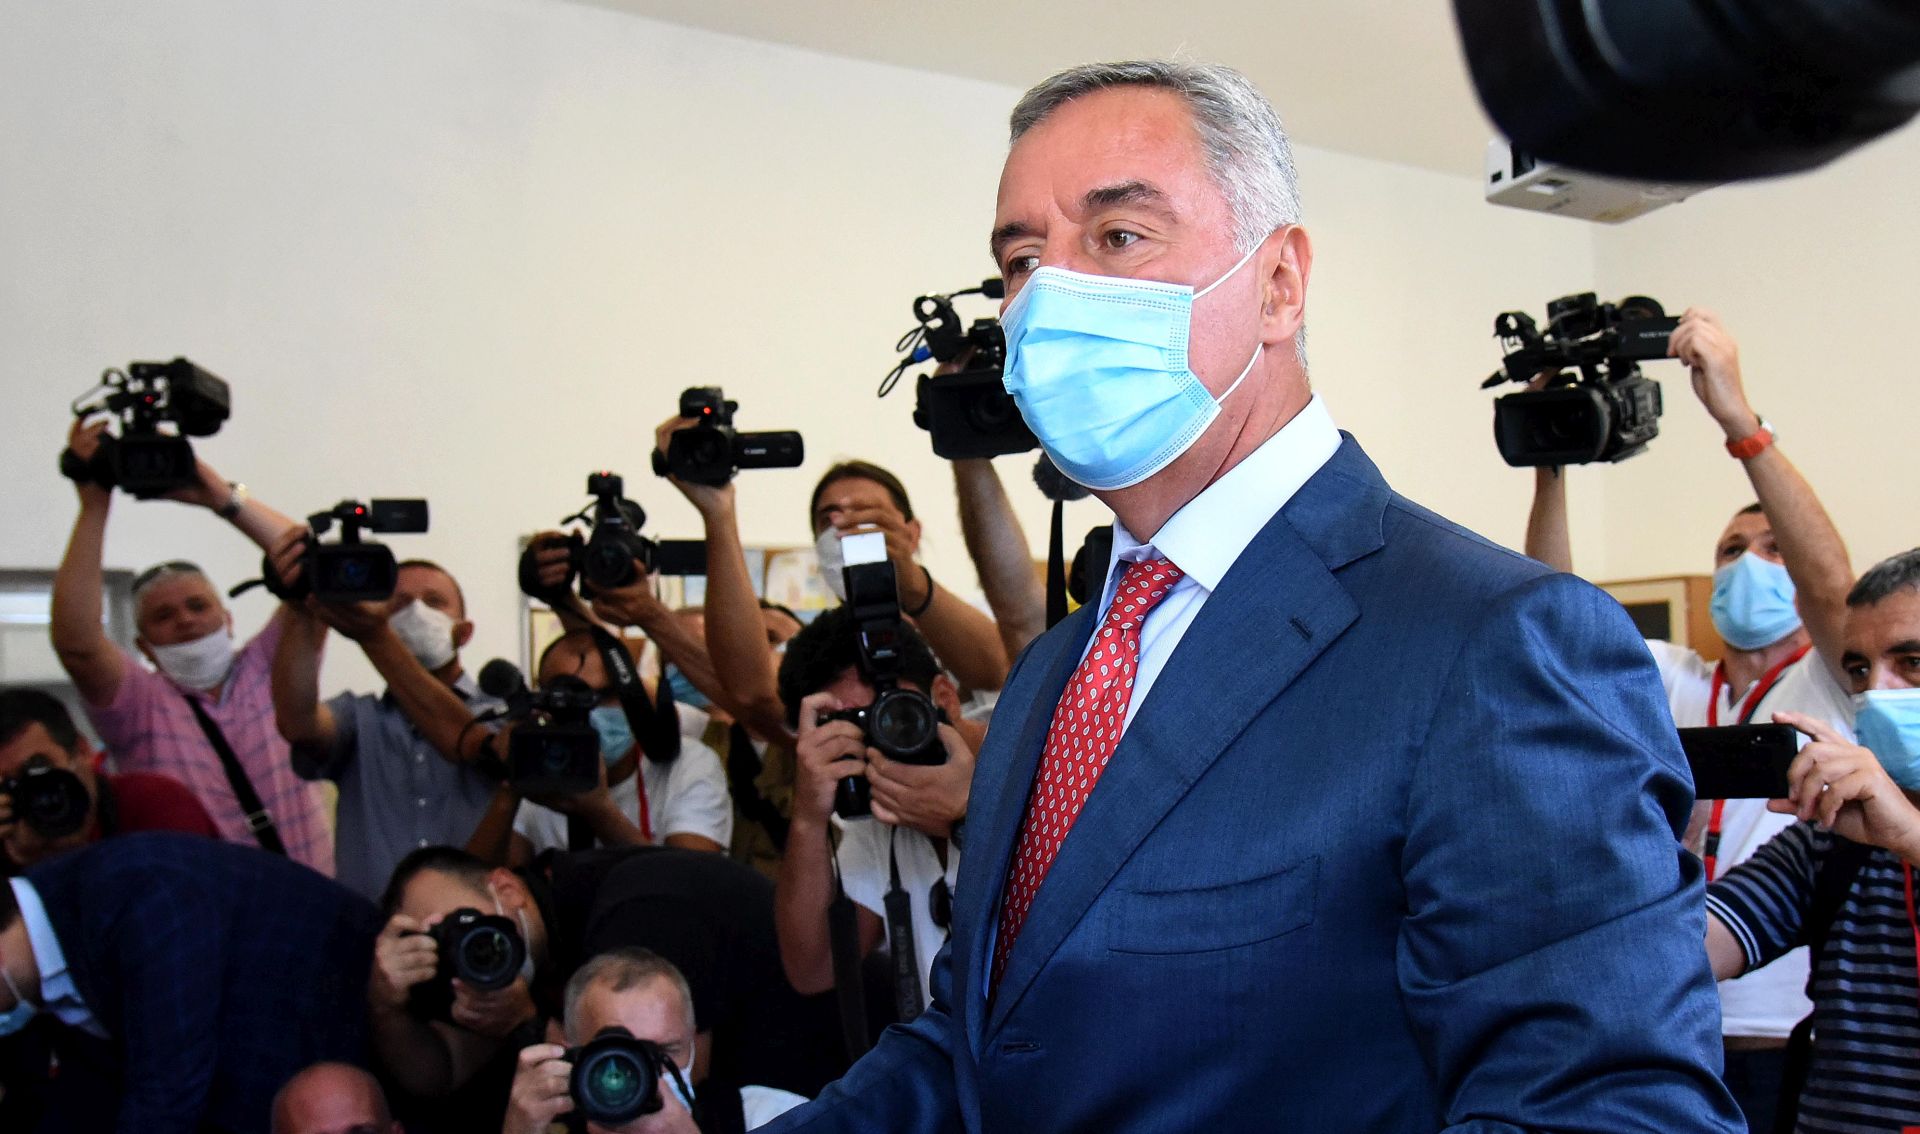 epa08635162 Montenegrian President Milo Djukanovic, leader of the Democratic Party of Socialists (DPS), wearing a face mask casts his vote during parliamentary elections at a polling station in Podgorica, Montenegro, 30 August 2020. Montenegrian voters are choosing their representatives in the 81-seat National Assembly.  EPA/BORIS PEJOVIC